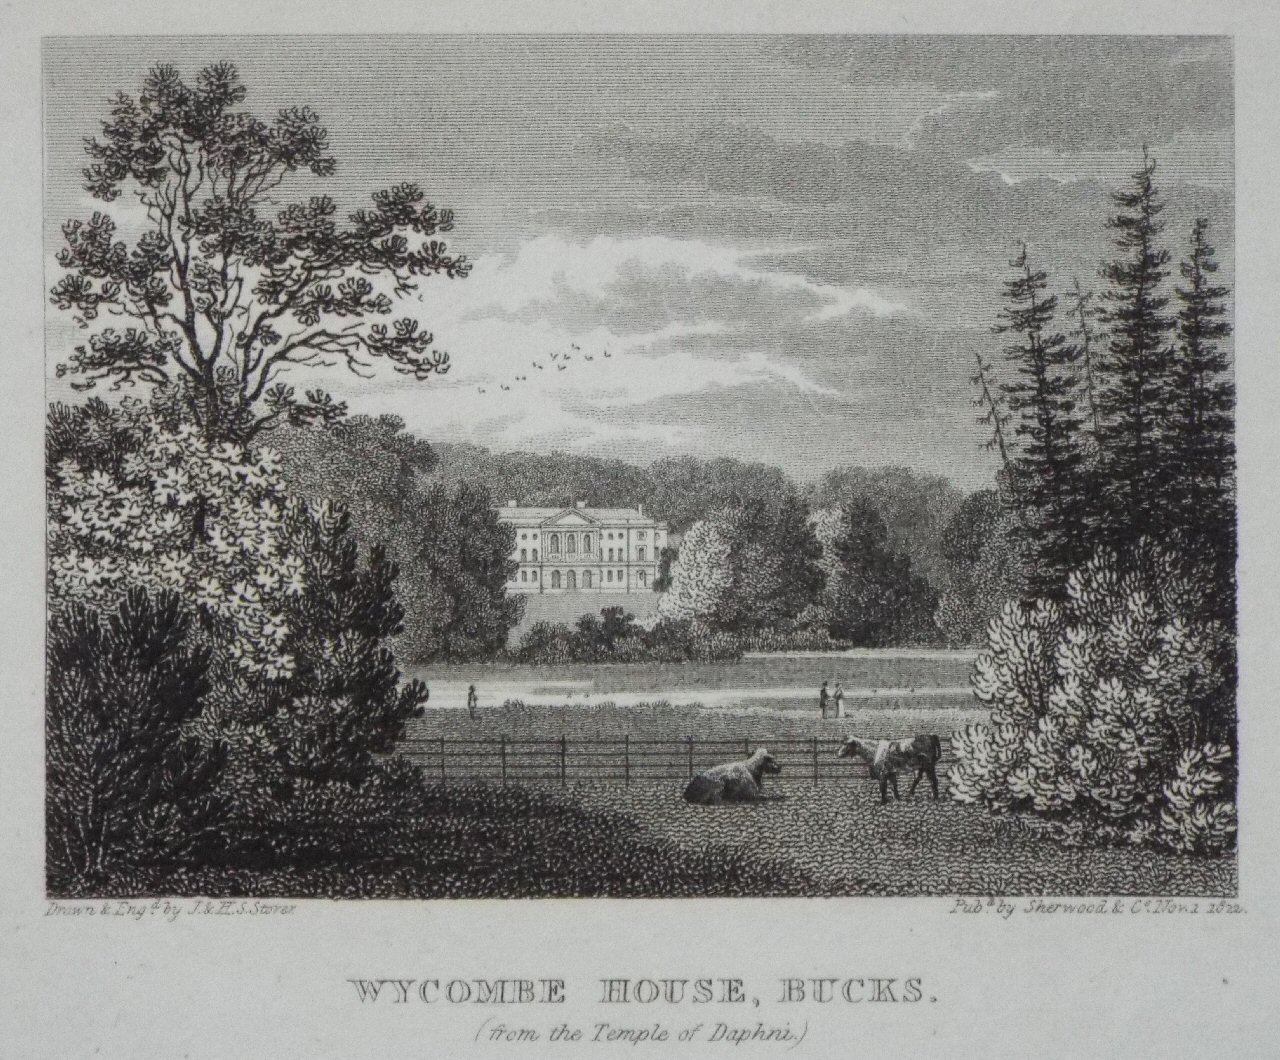 Print - Wycombe House, Bucks. (from the Temple of Daphni.) - Storer